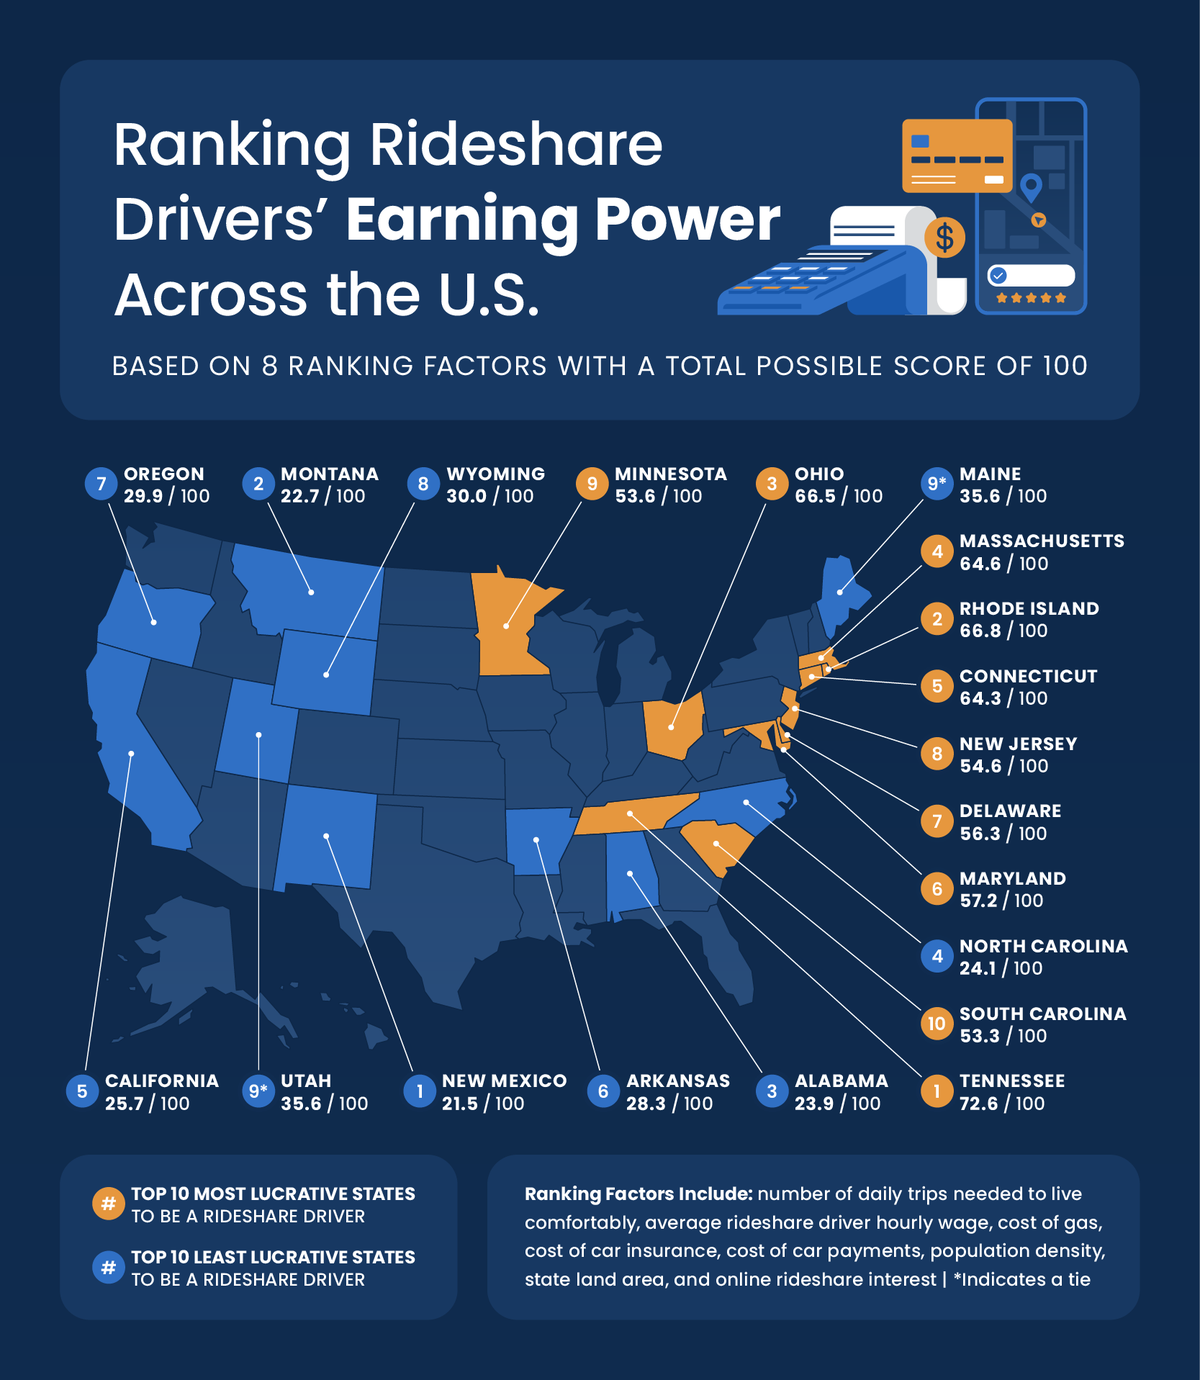 U.S. map showing the 10 best and 10 worst states for rideshare drivers